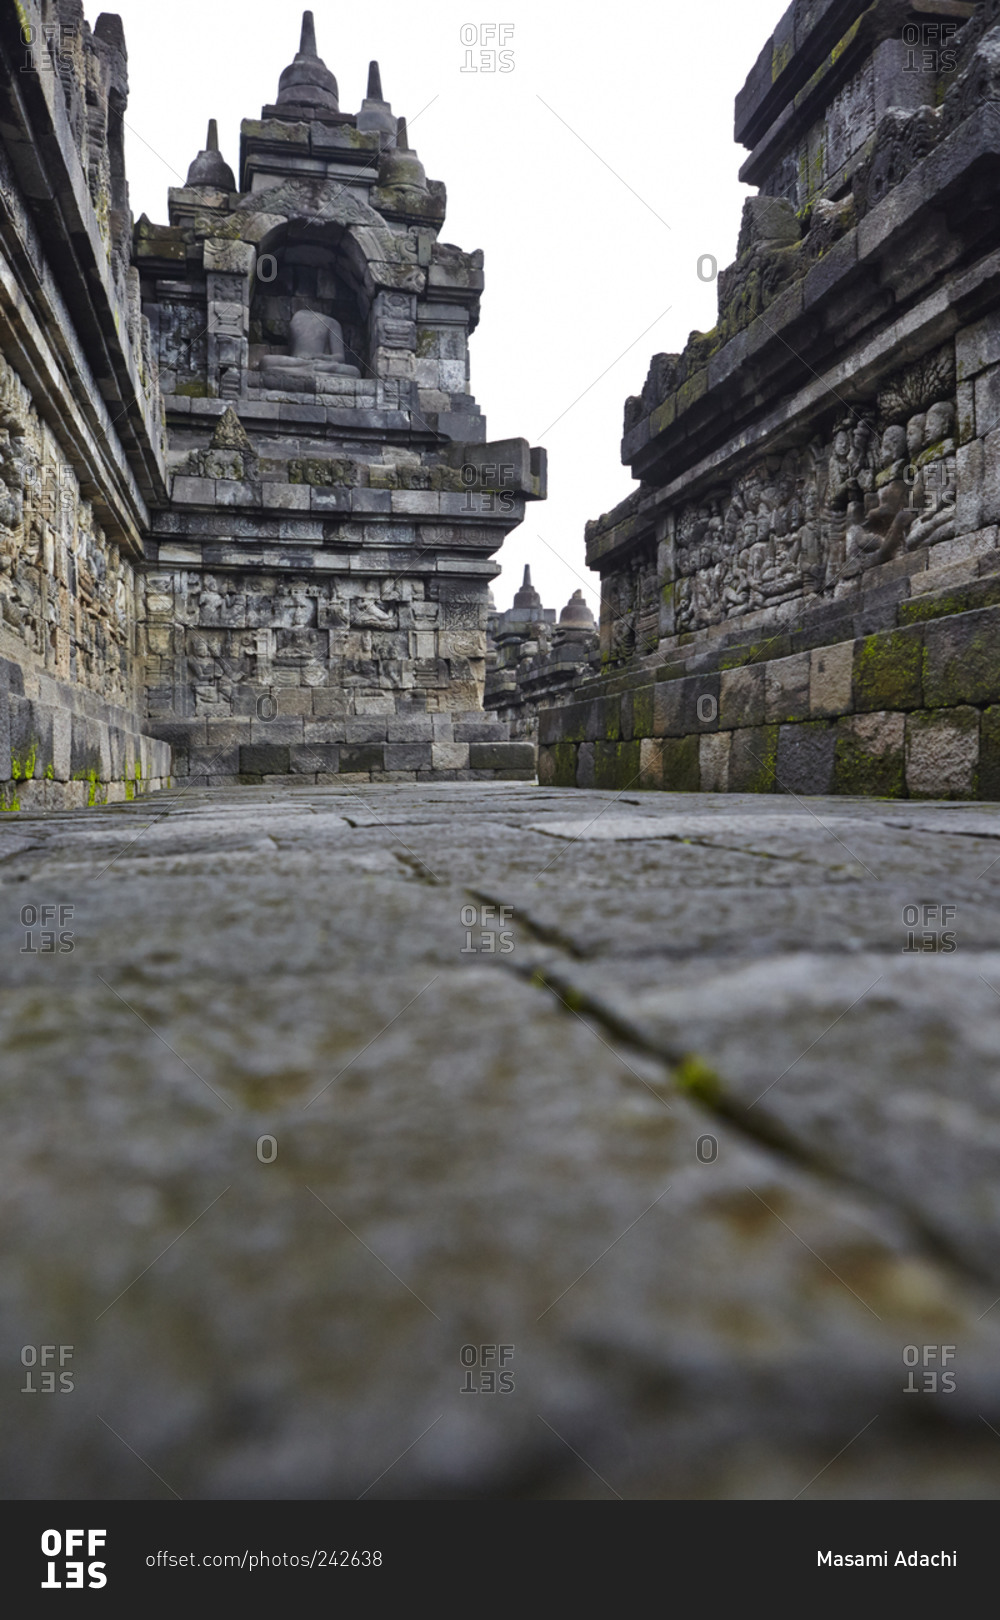 Architecture of Borobudur temple in Magelang, Central Java, Indonesia